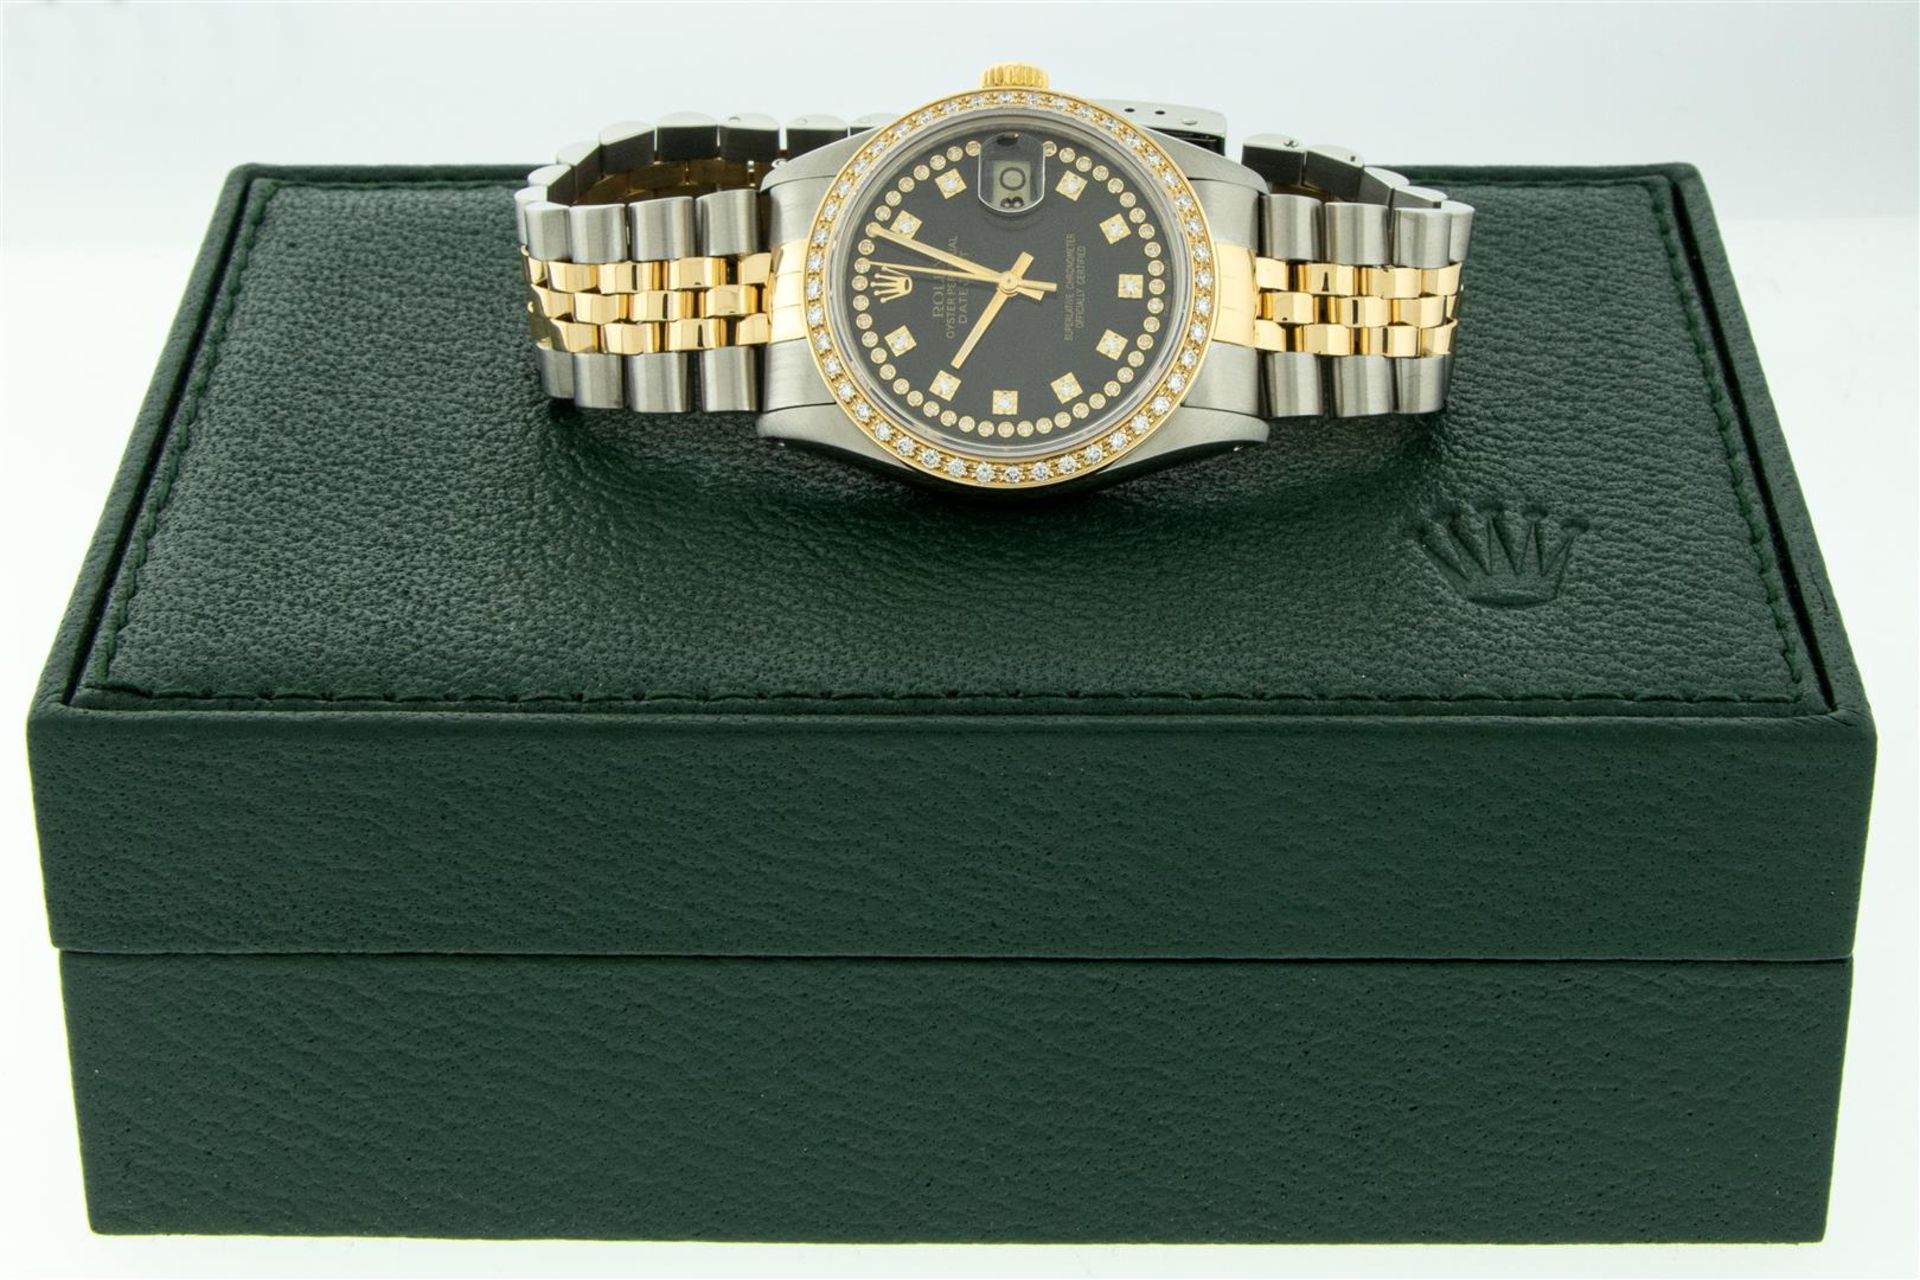 Rolex Mens 2 Tone Black String VS Diamond Oyster Perpetual Datejust Wristwatch - Image 9 of 9